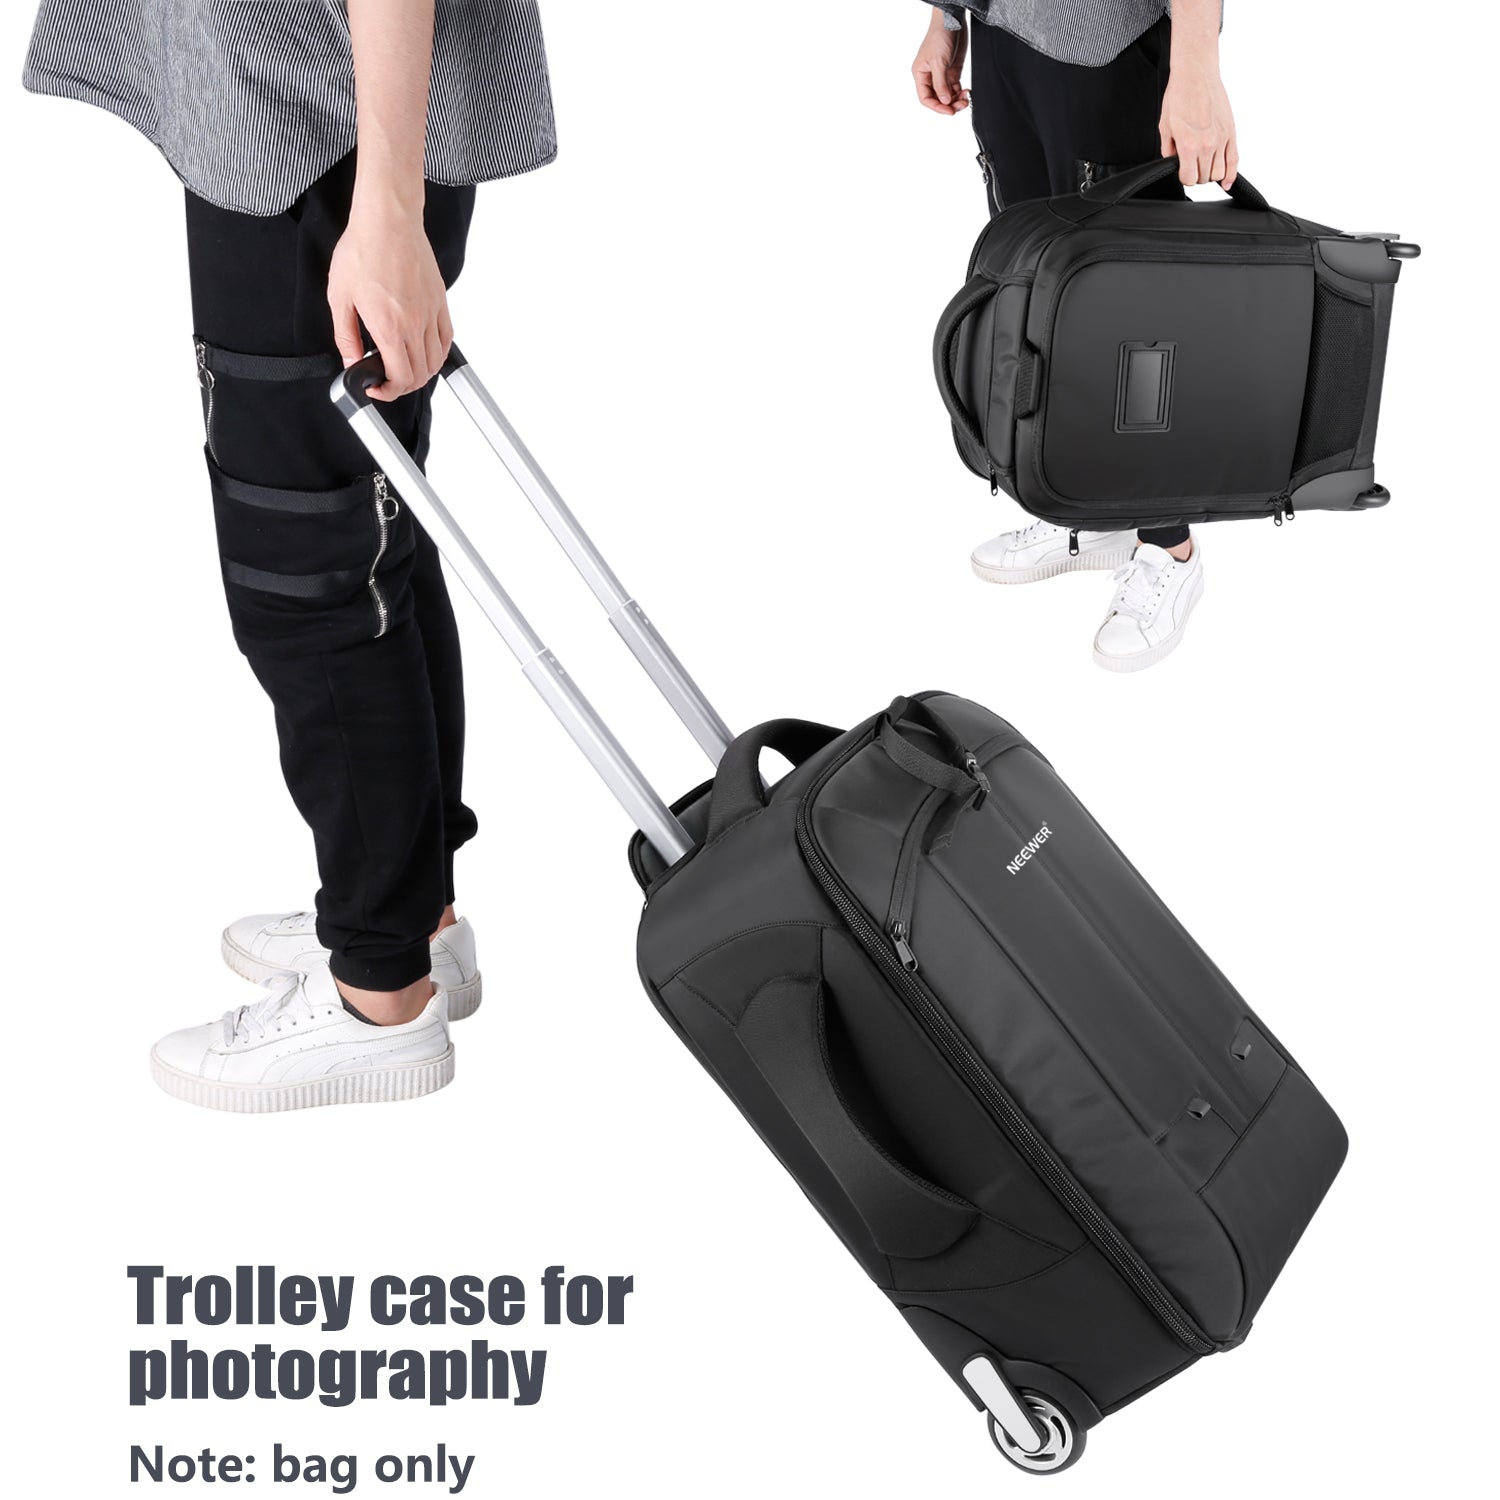 Black Polycarbonate Safari Trolley Bags for Travel, 55 cm Cabin Suitcase,  Number Of Wheel: 4, Size: 55cms at Rs 2800/piece in Mumbai